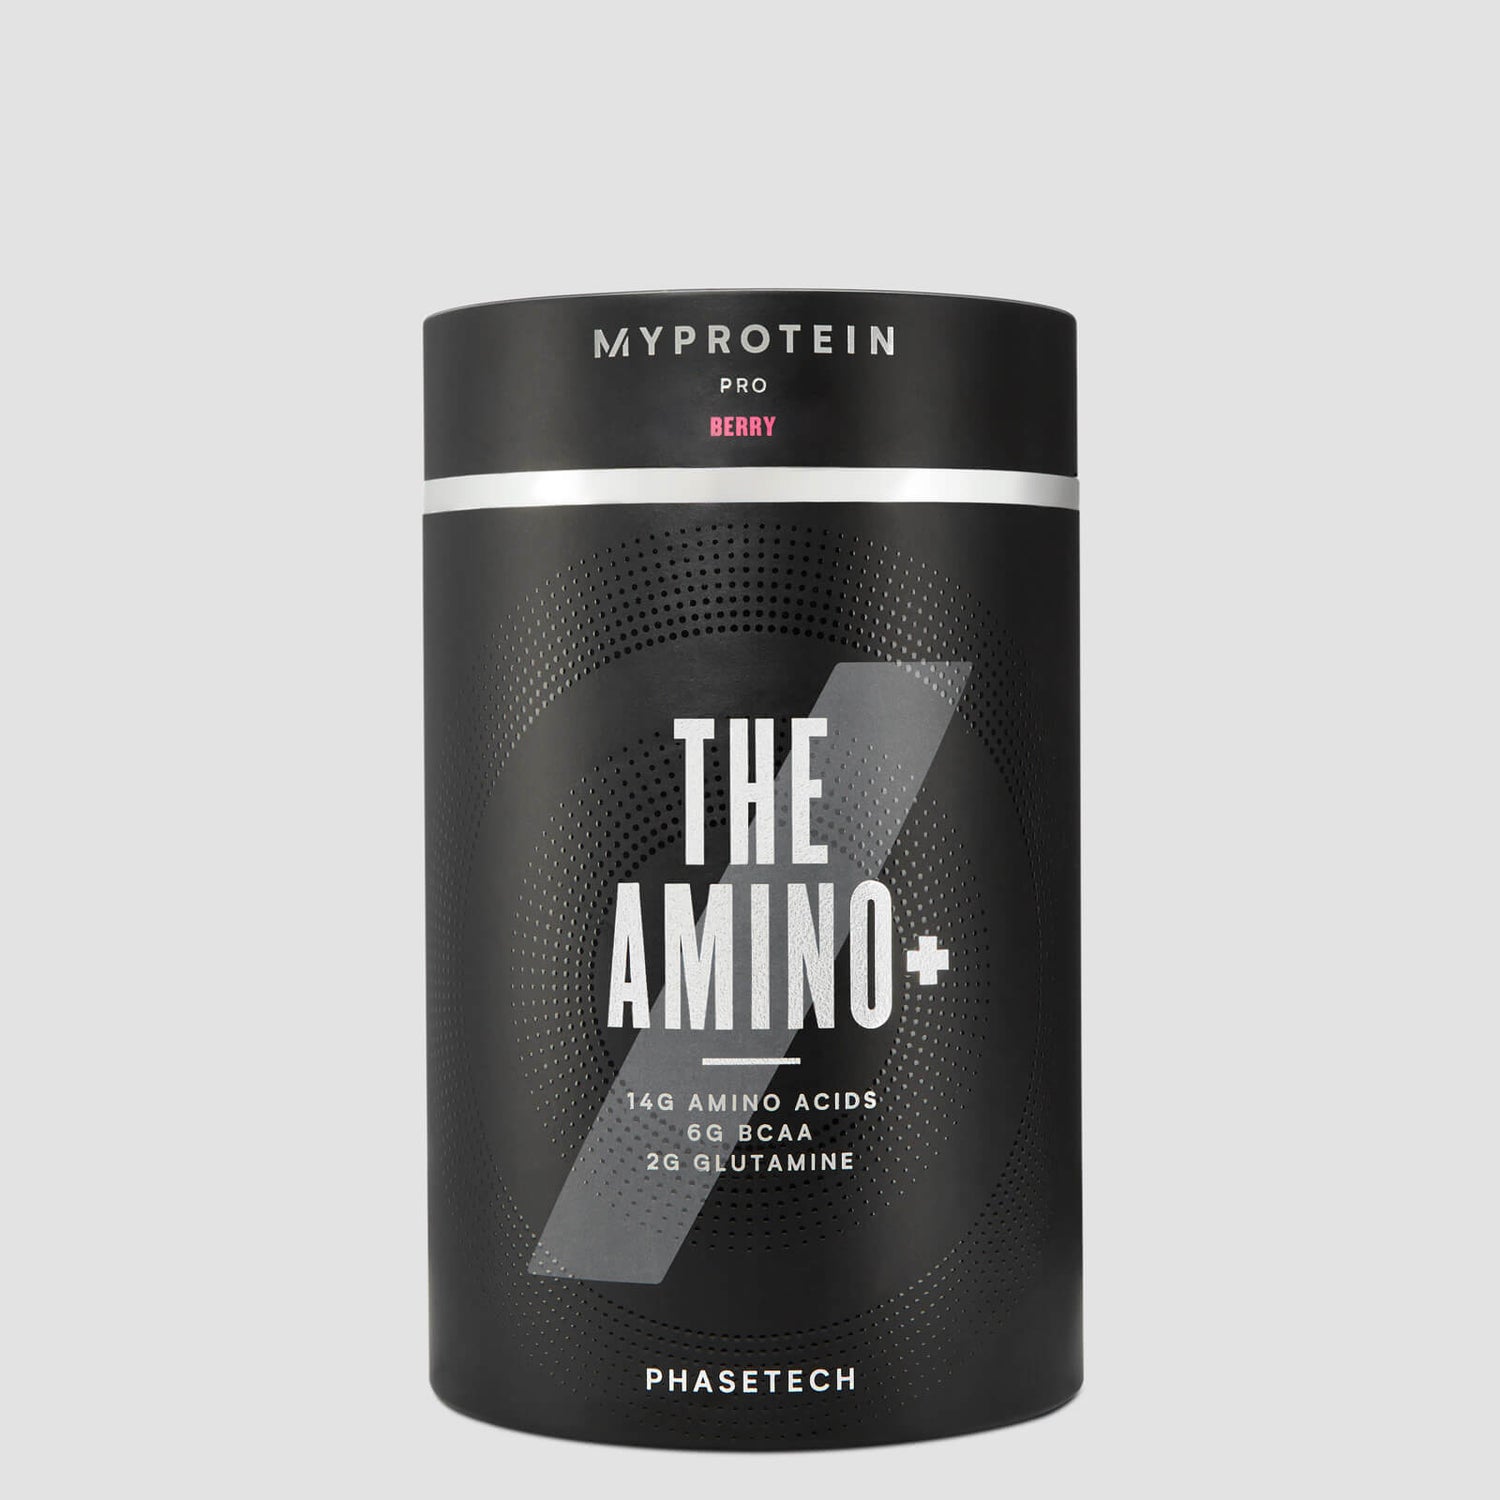 THE Amino+ - 20servings - Bacche